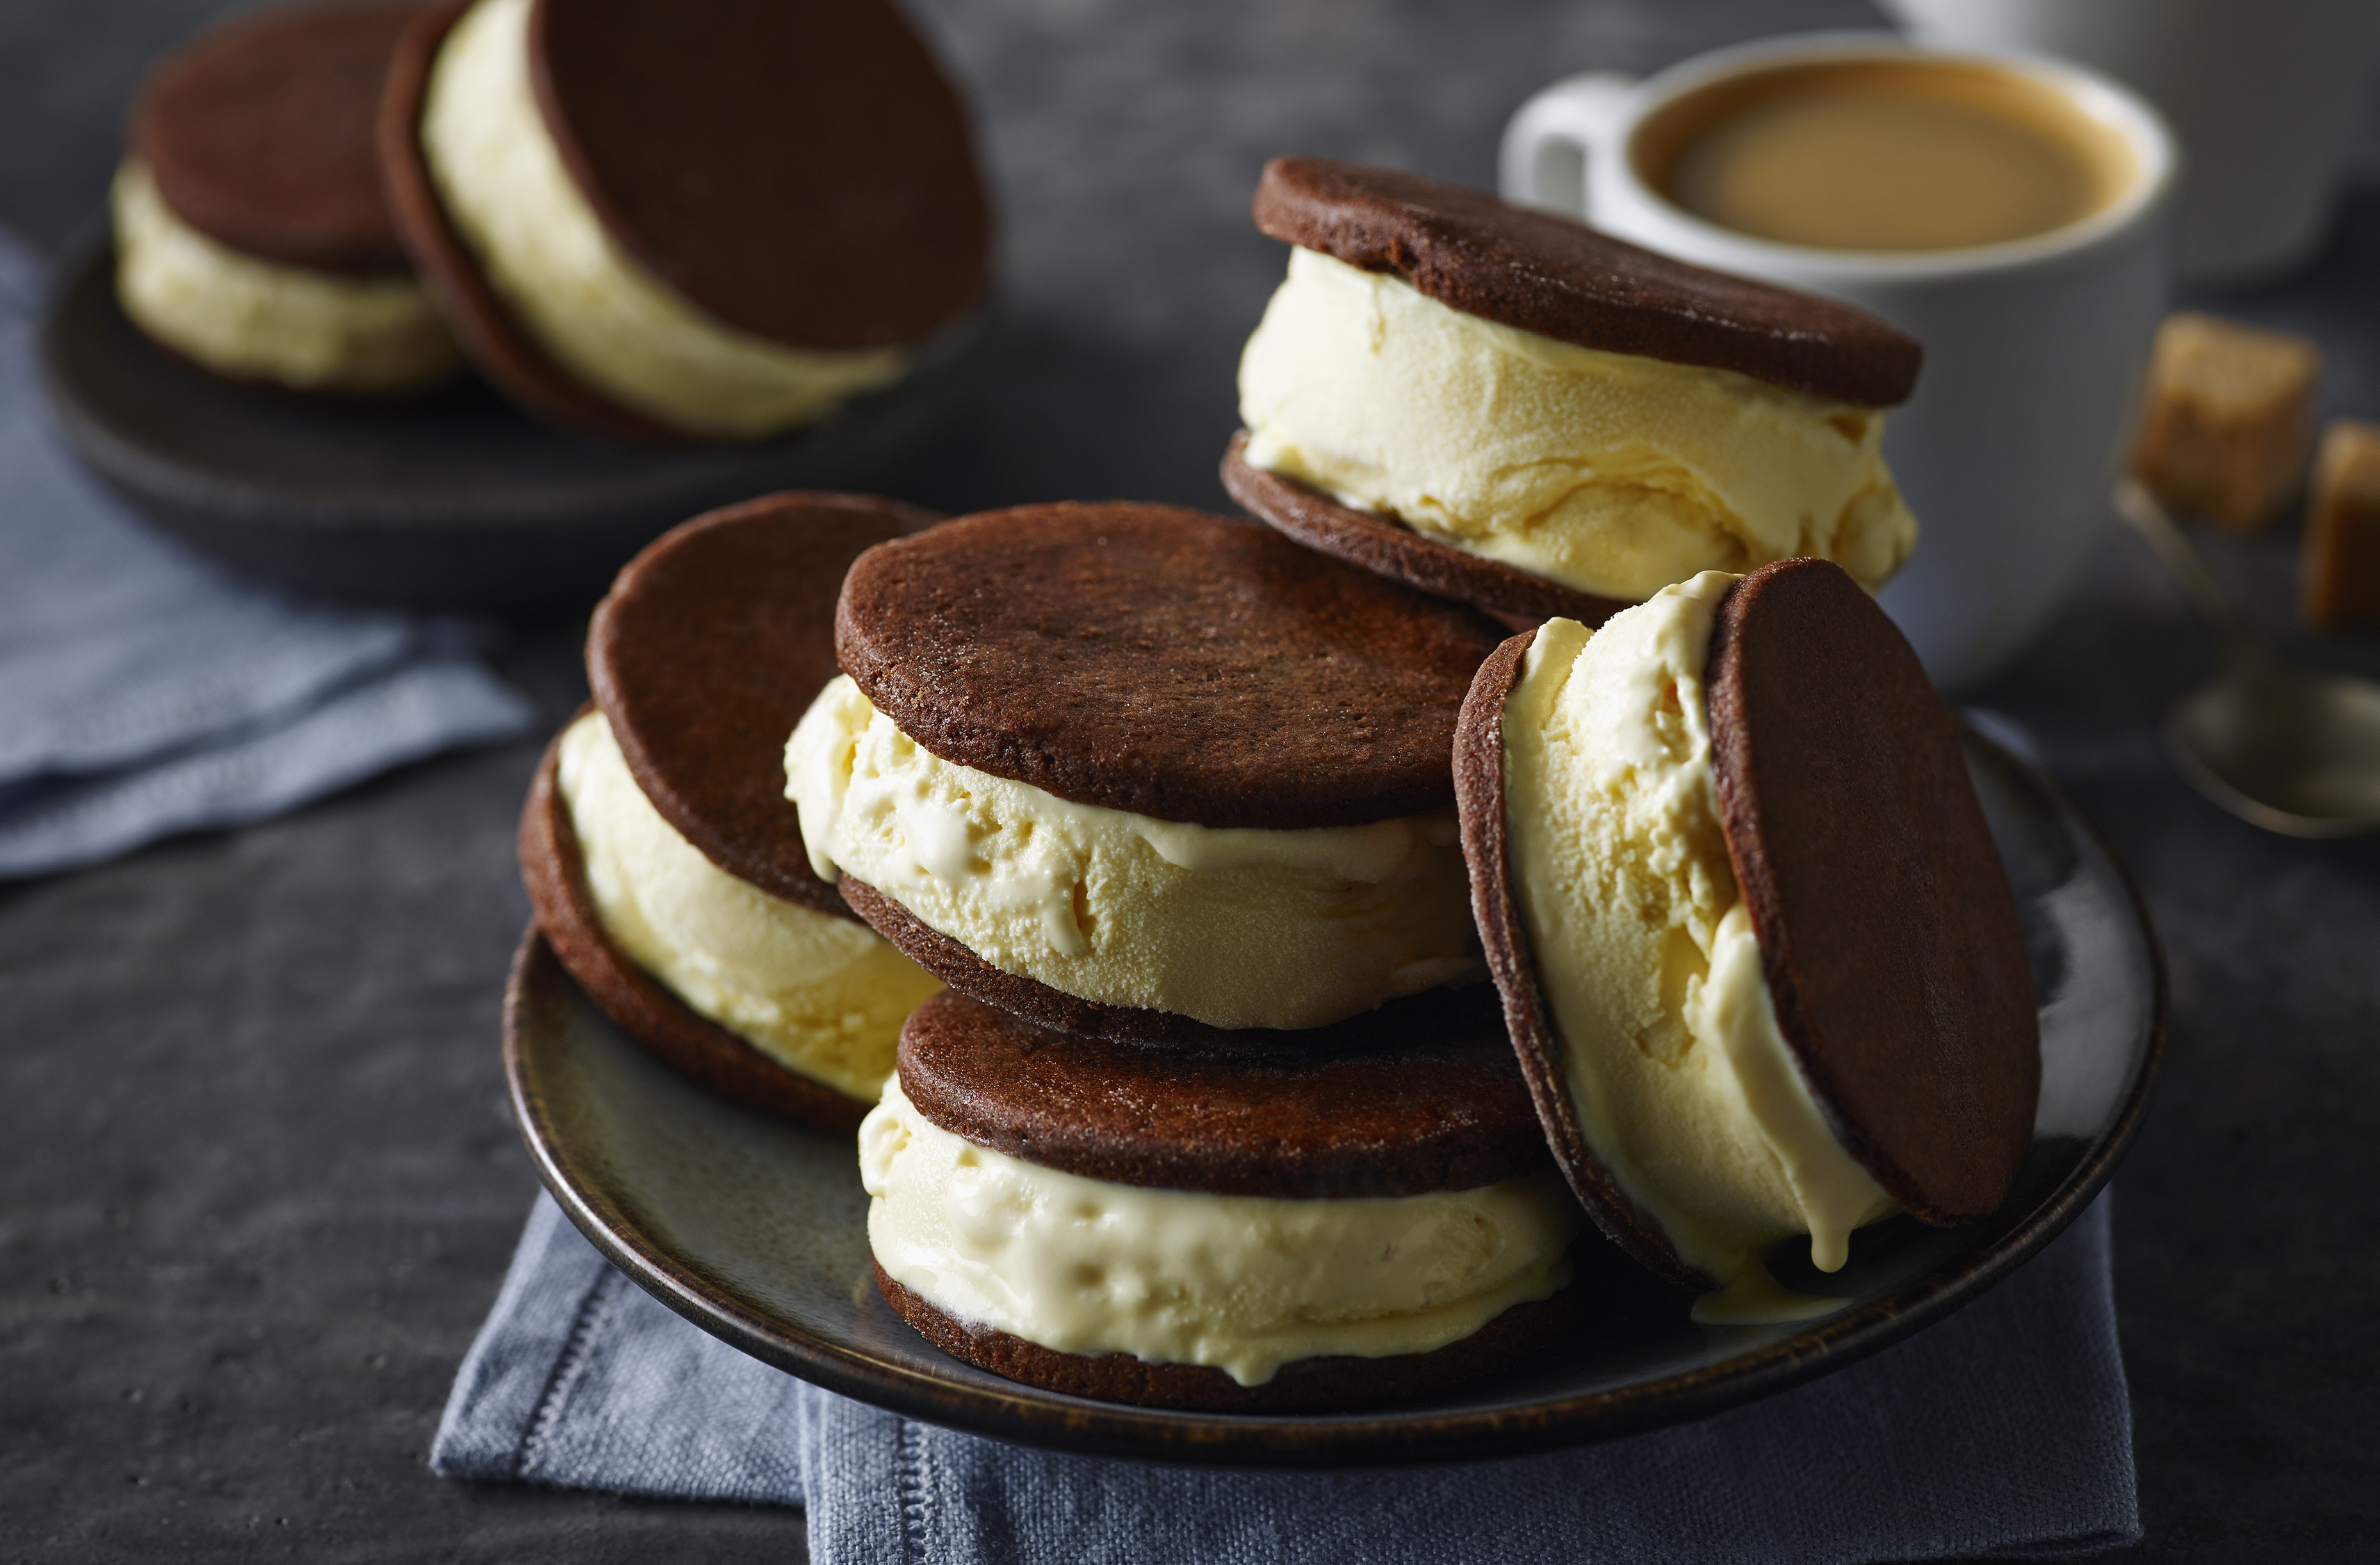 Ice cream sandwiches made with chocolate cookies and vanilla ice cream.  5 of them stacked and placed on a serving platter